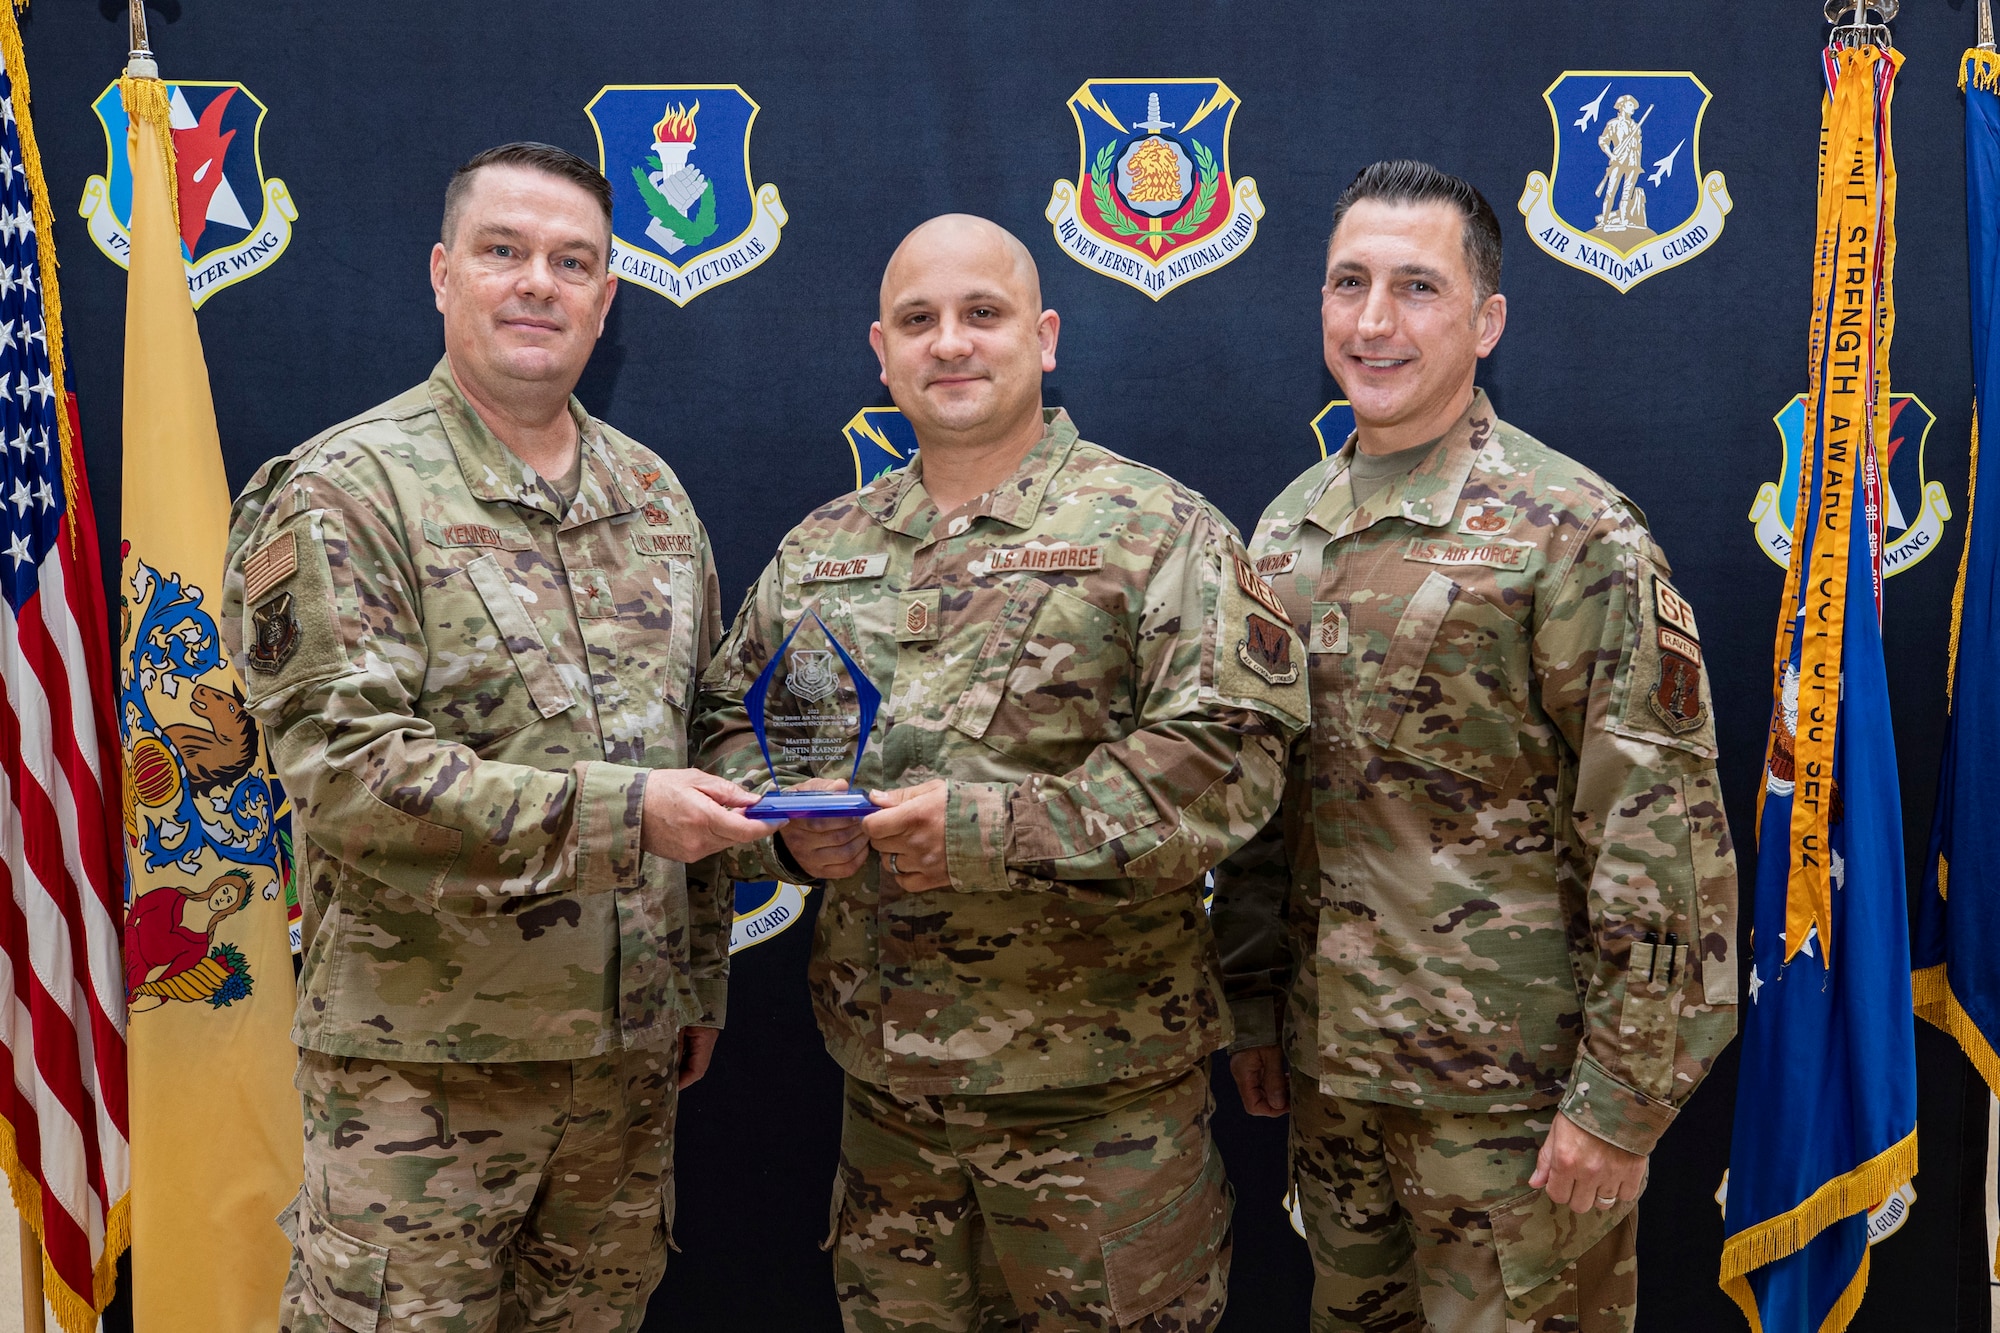 The New Jersey Air National Guard held their annual awards ceremony on Joint Base McGuire-Dix-Lakehurst, New Jersey, June 22, 2022. Master Sgt. Justin Kaenzig, 177th Medical Group, is presented with the 2021 Outstanding SNCO of the Year award by Brig. Gen. Patrick Kennedy and State Command Chief Master Sgt. Michael Rakauckas.